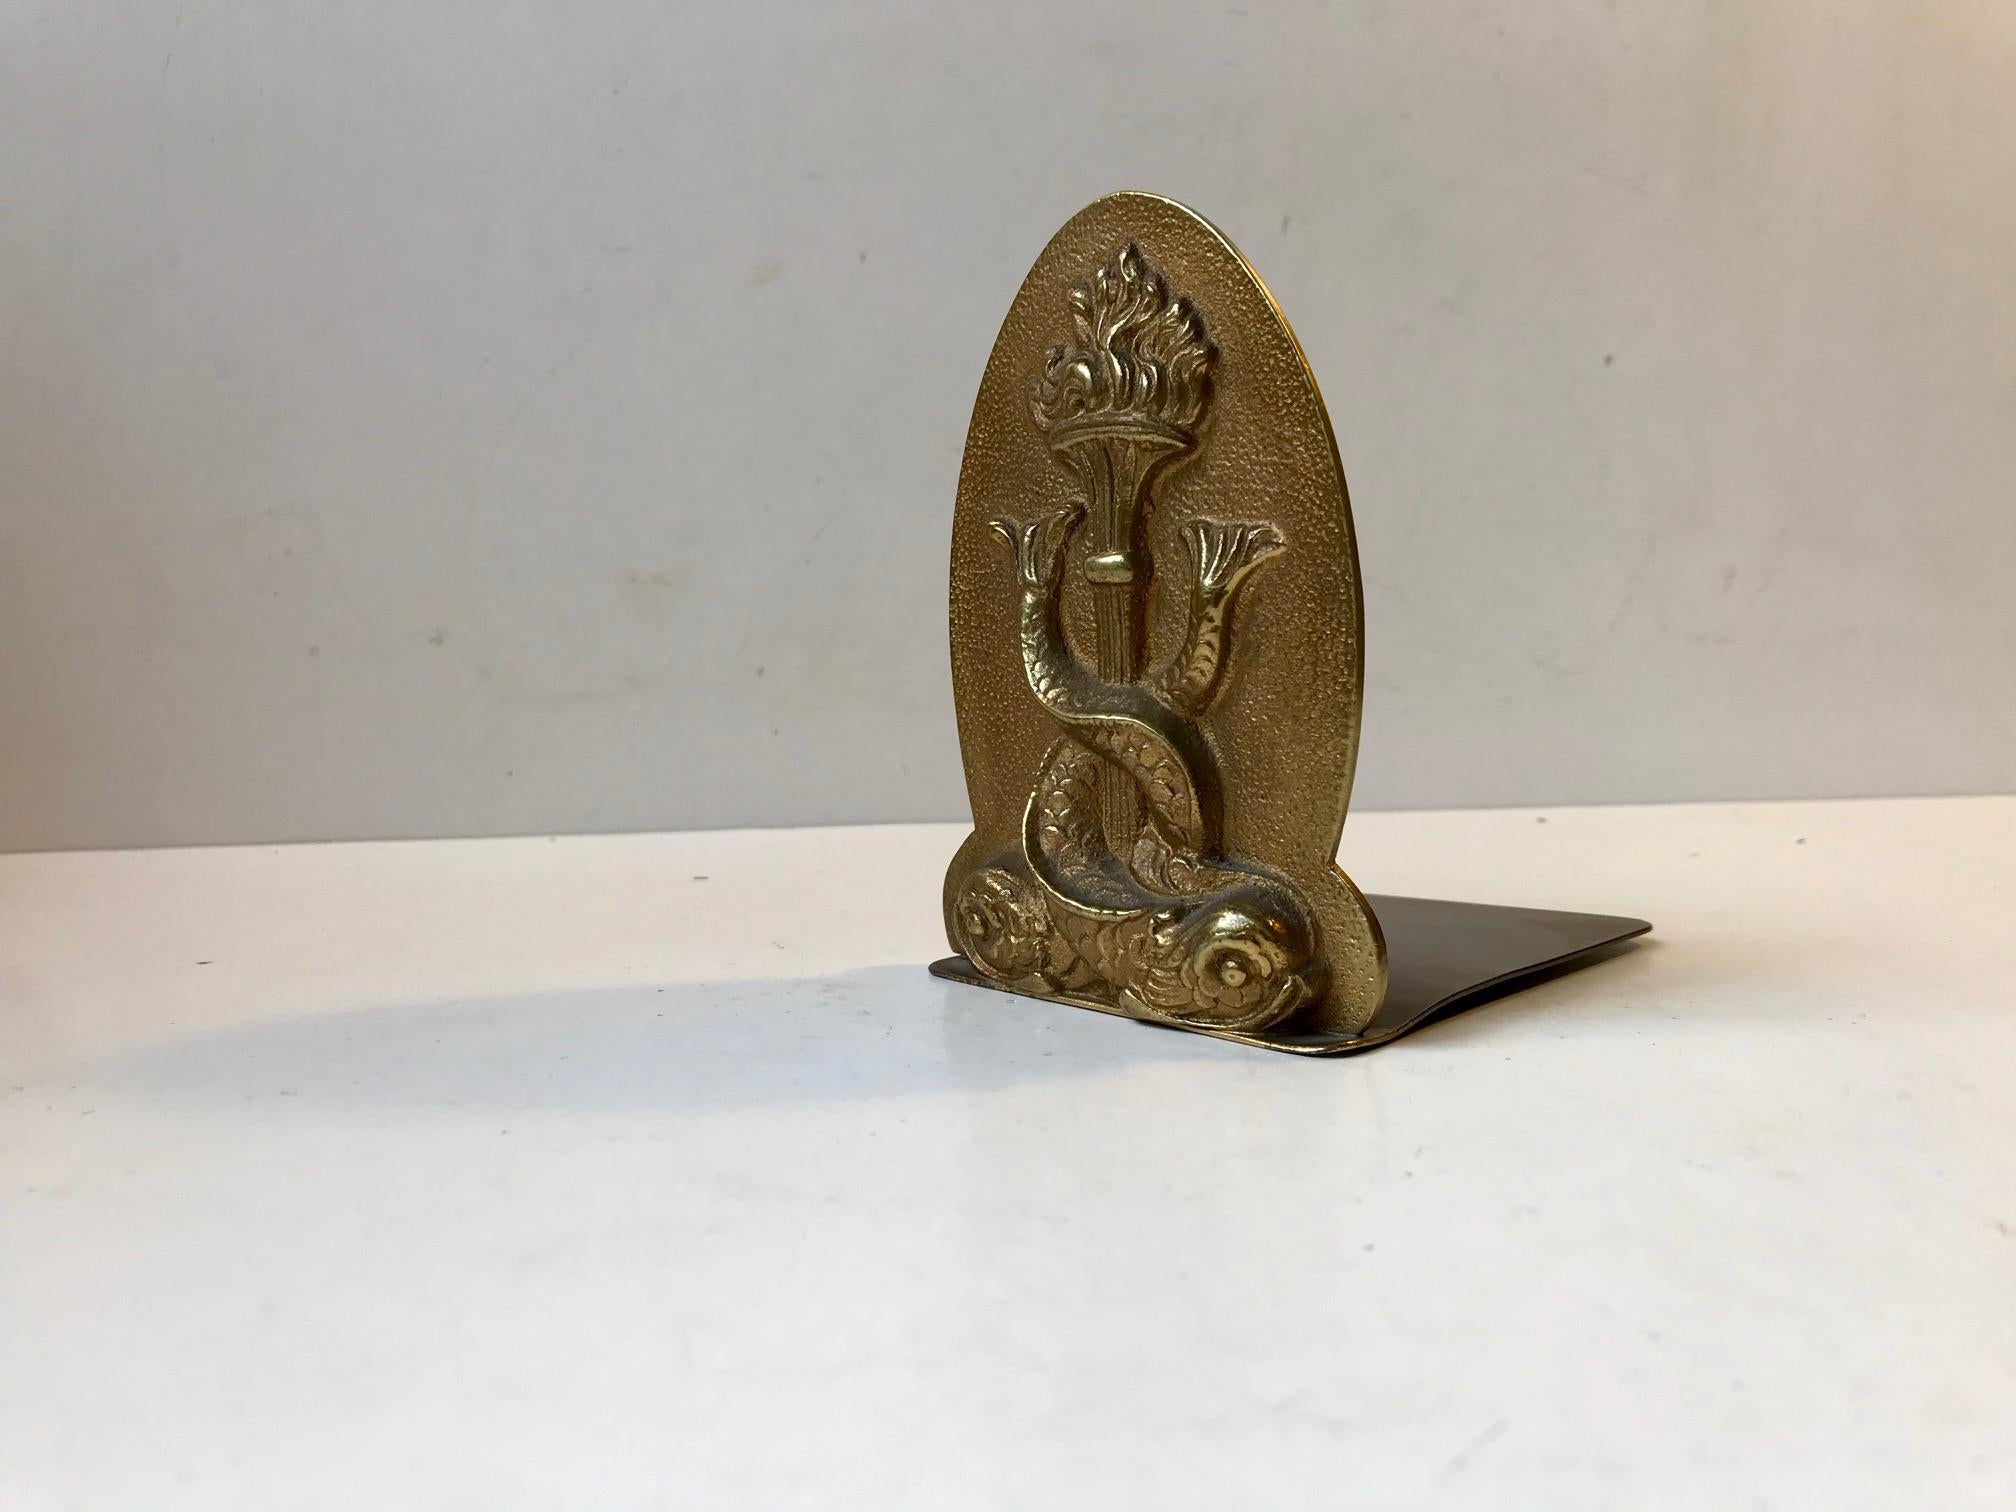 Old Chinese bronze bookend with a monogram of dolphins around a torch. It dates to circa 1930-1940. Unknown maker. No markings.